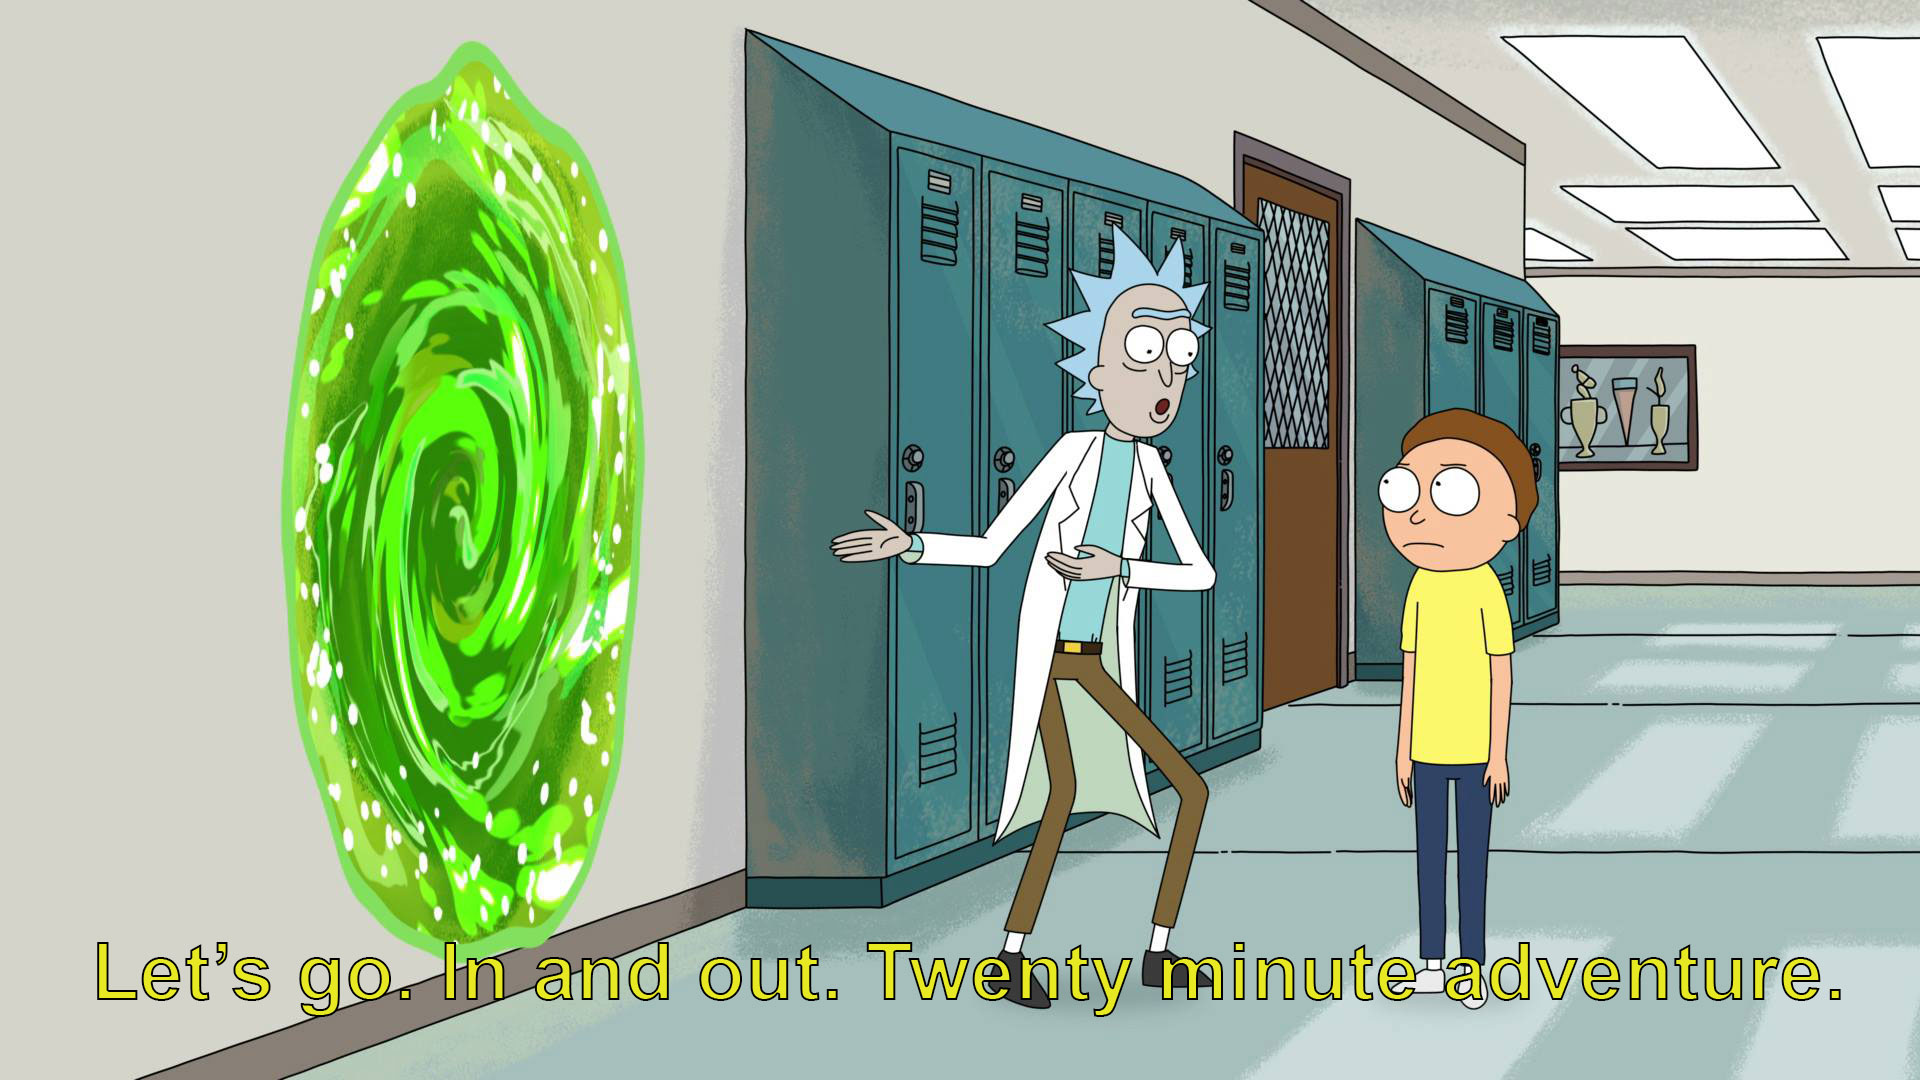 rick-and-morty-20-minute-adventure.jpg